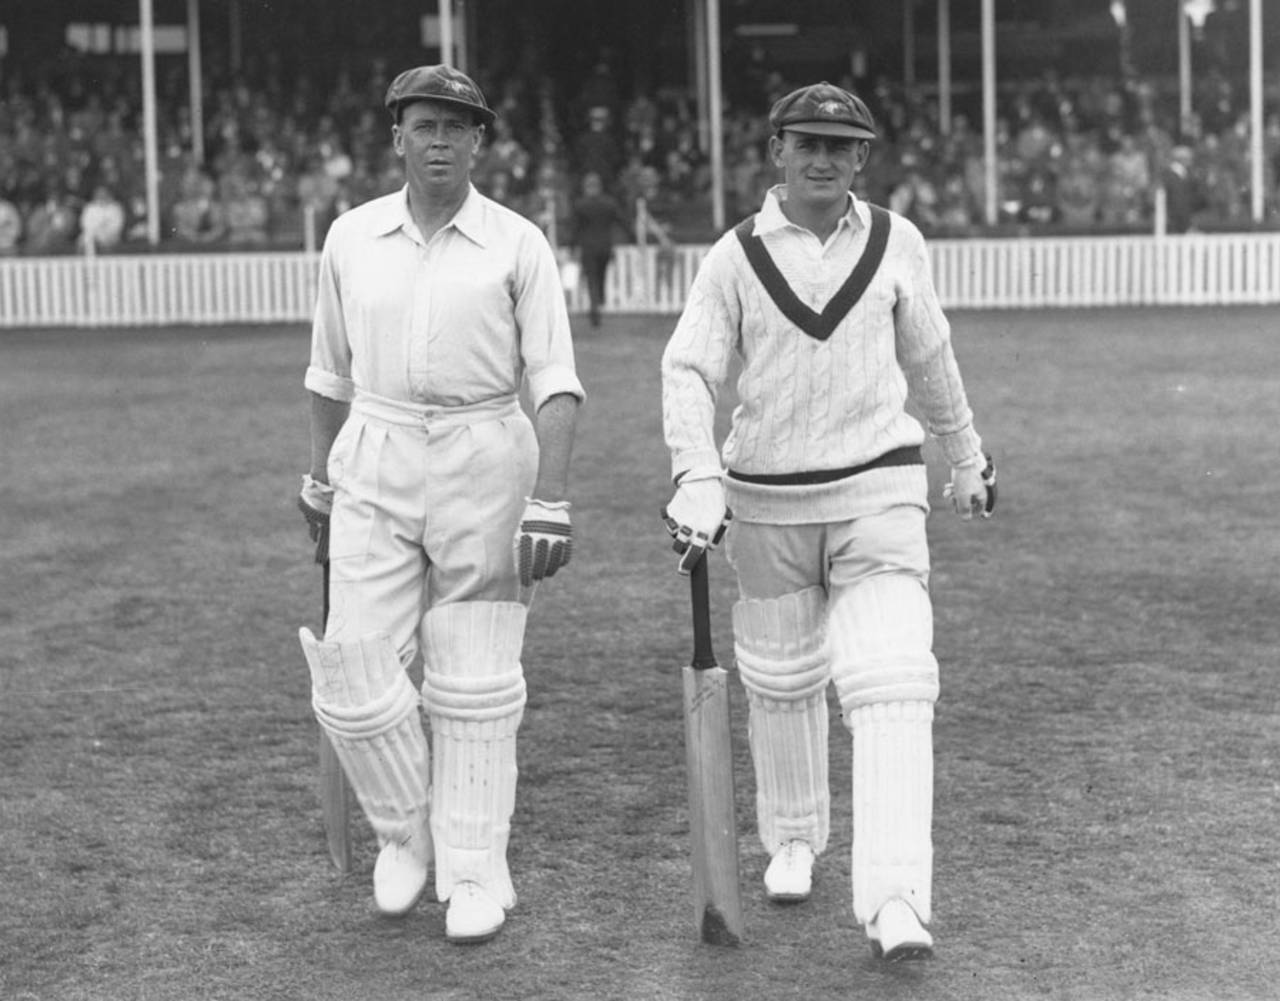 Bill Ponsford and Stan McCabe (right) walk out to bat, 1938